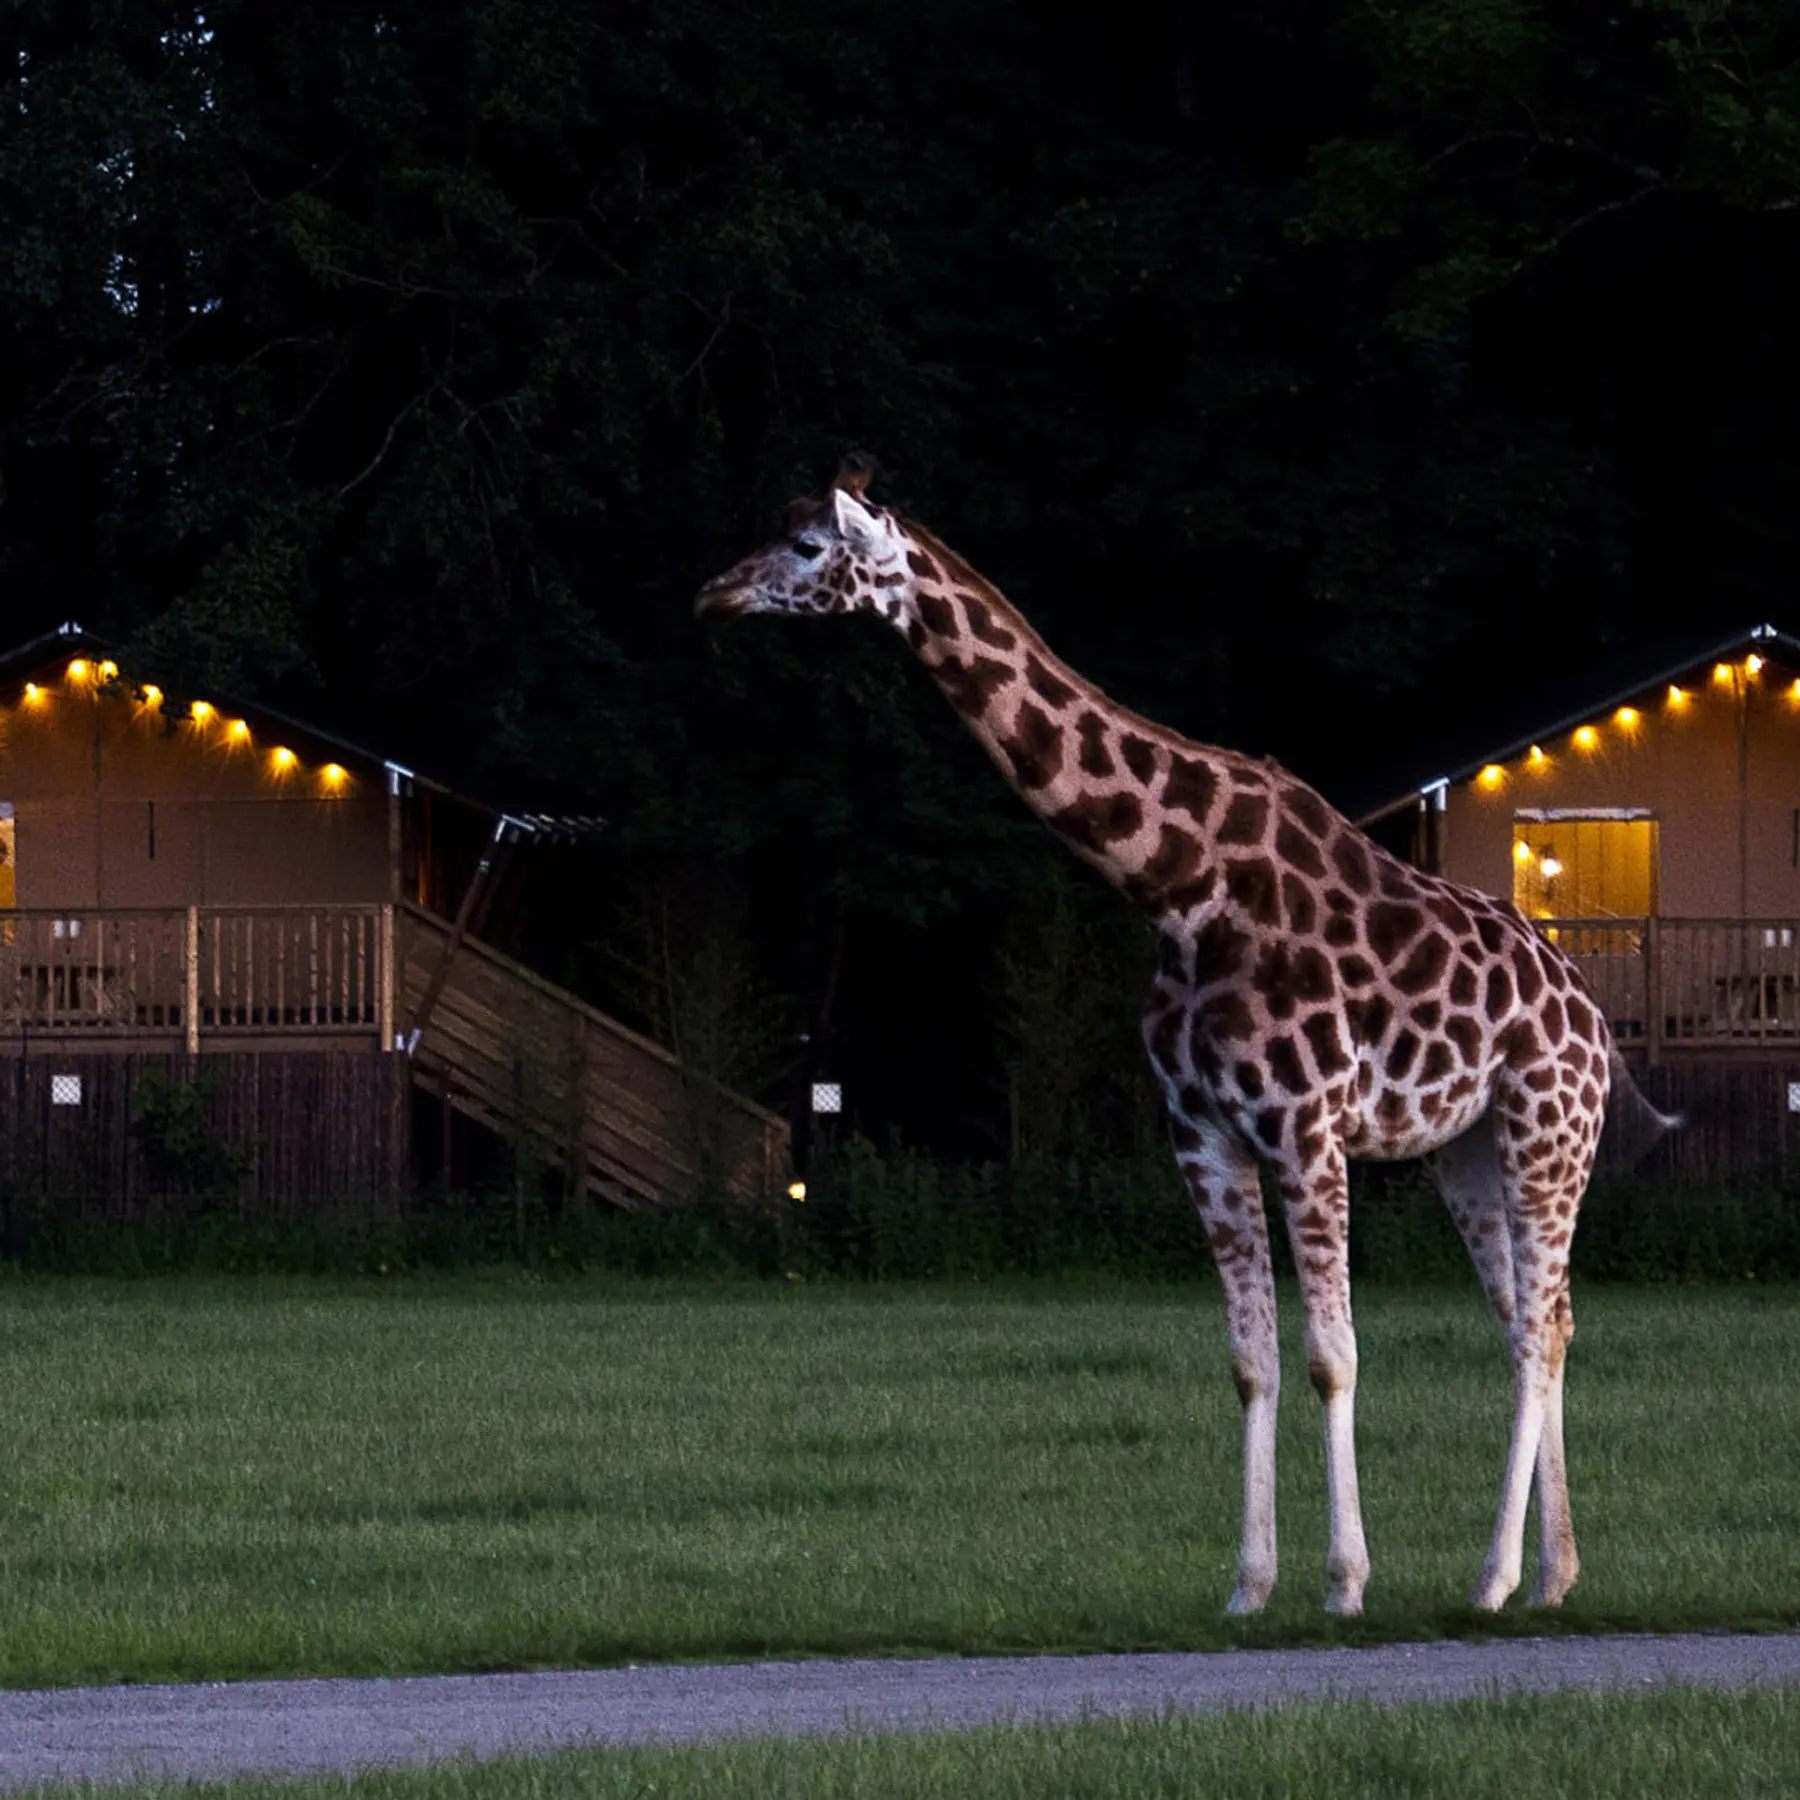 Giraffe in front of tents